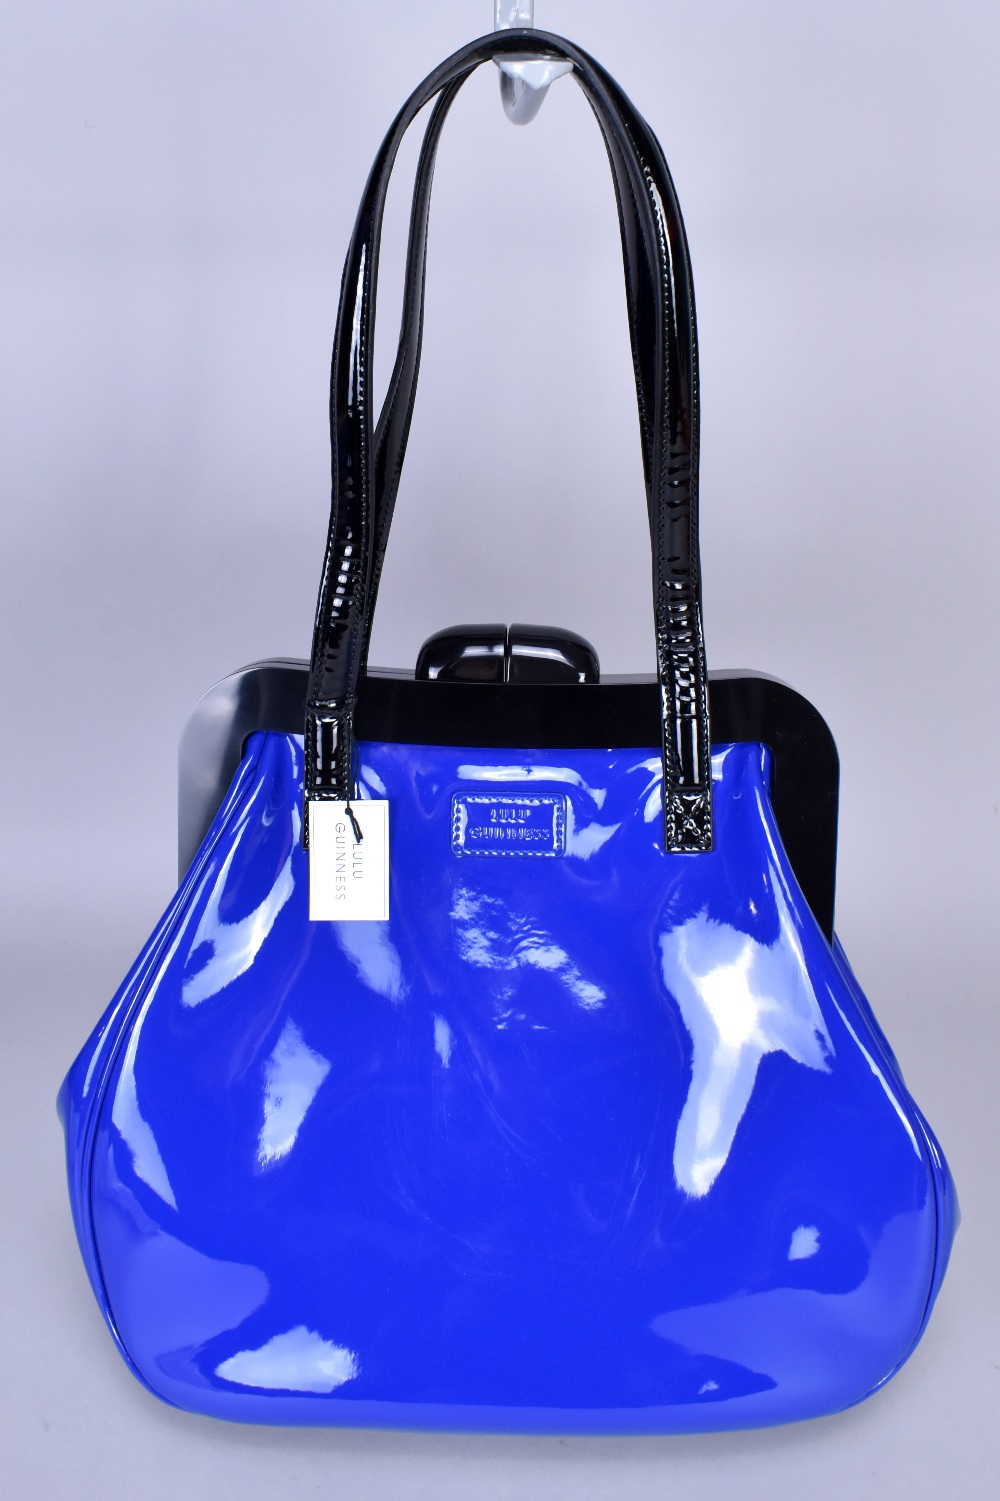 LULU GUINNESS; a patent leather cobalt blue leather 'Mid Pollyanna' handbag with a patent lips